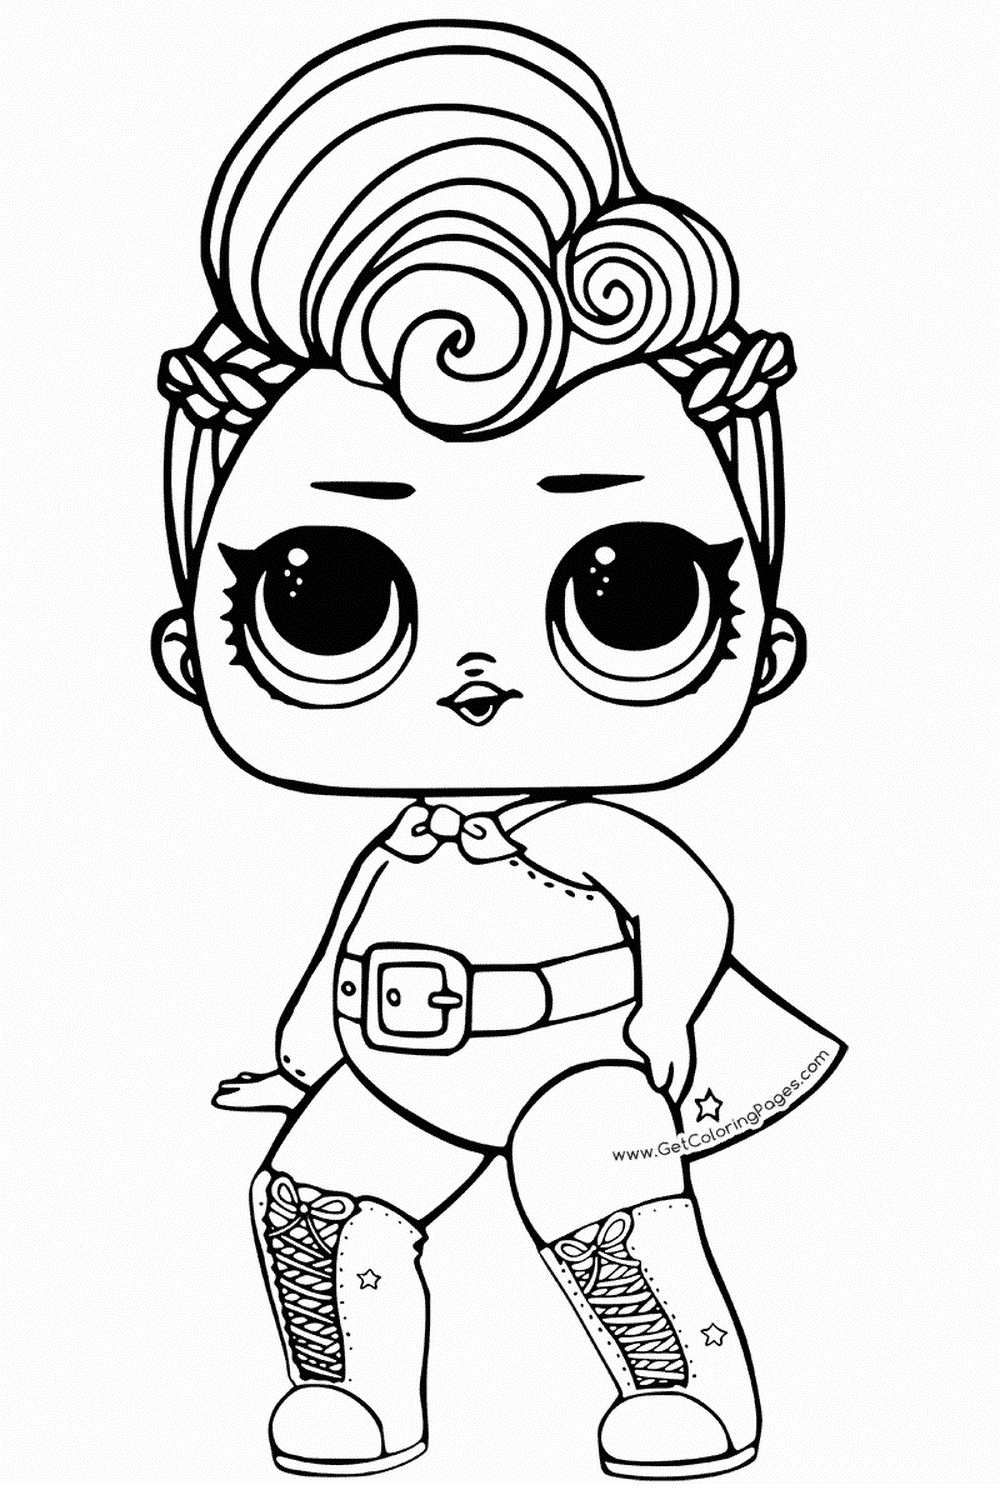 LOL Surprise Dolls Coloring Pages. Print Them for Free! All the Series!